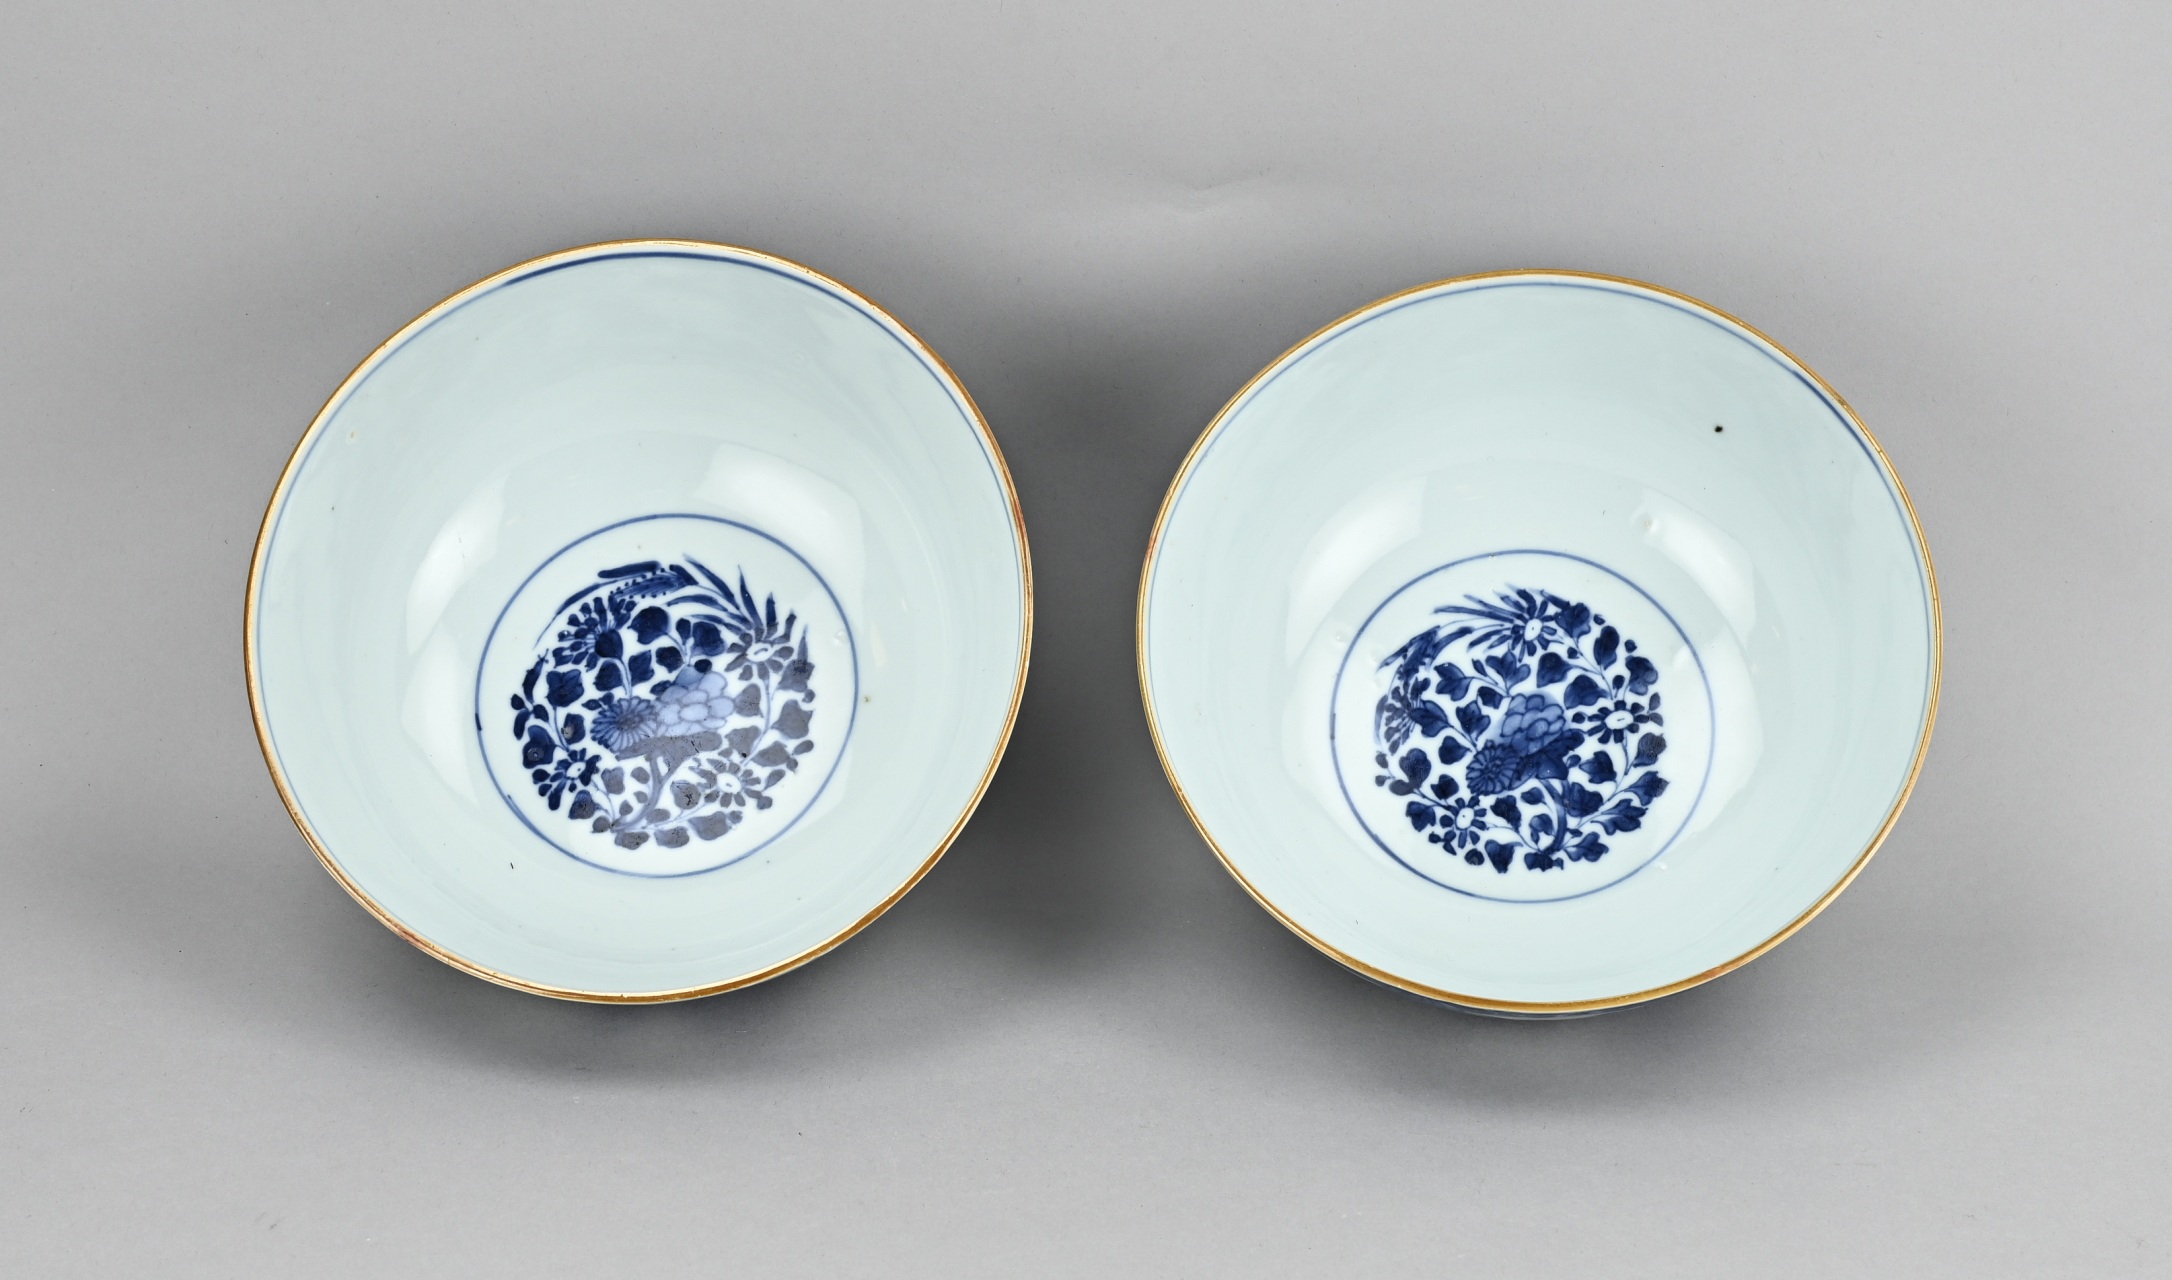 Pair of Chinese bowls Ã˜ 19 cm. - Image 2 of 3